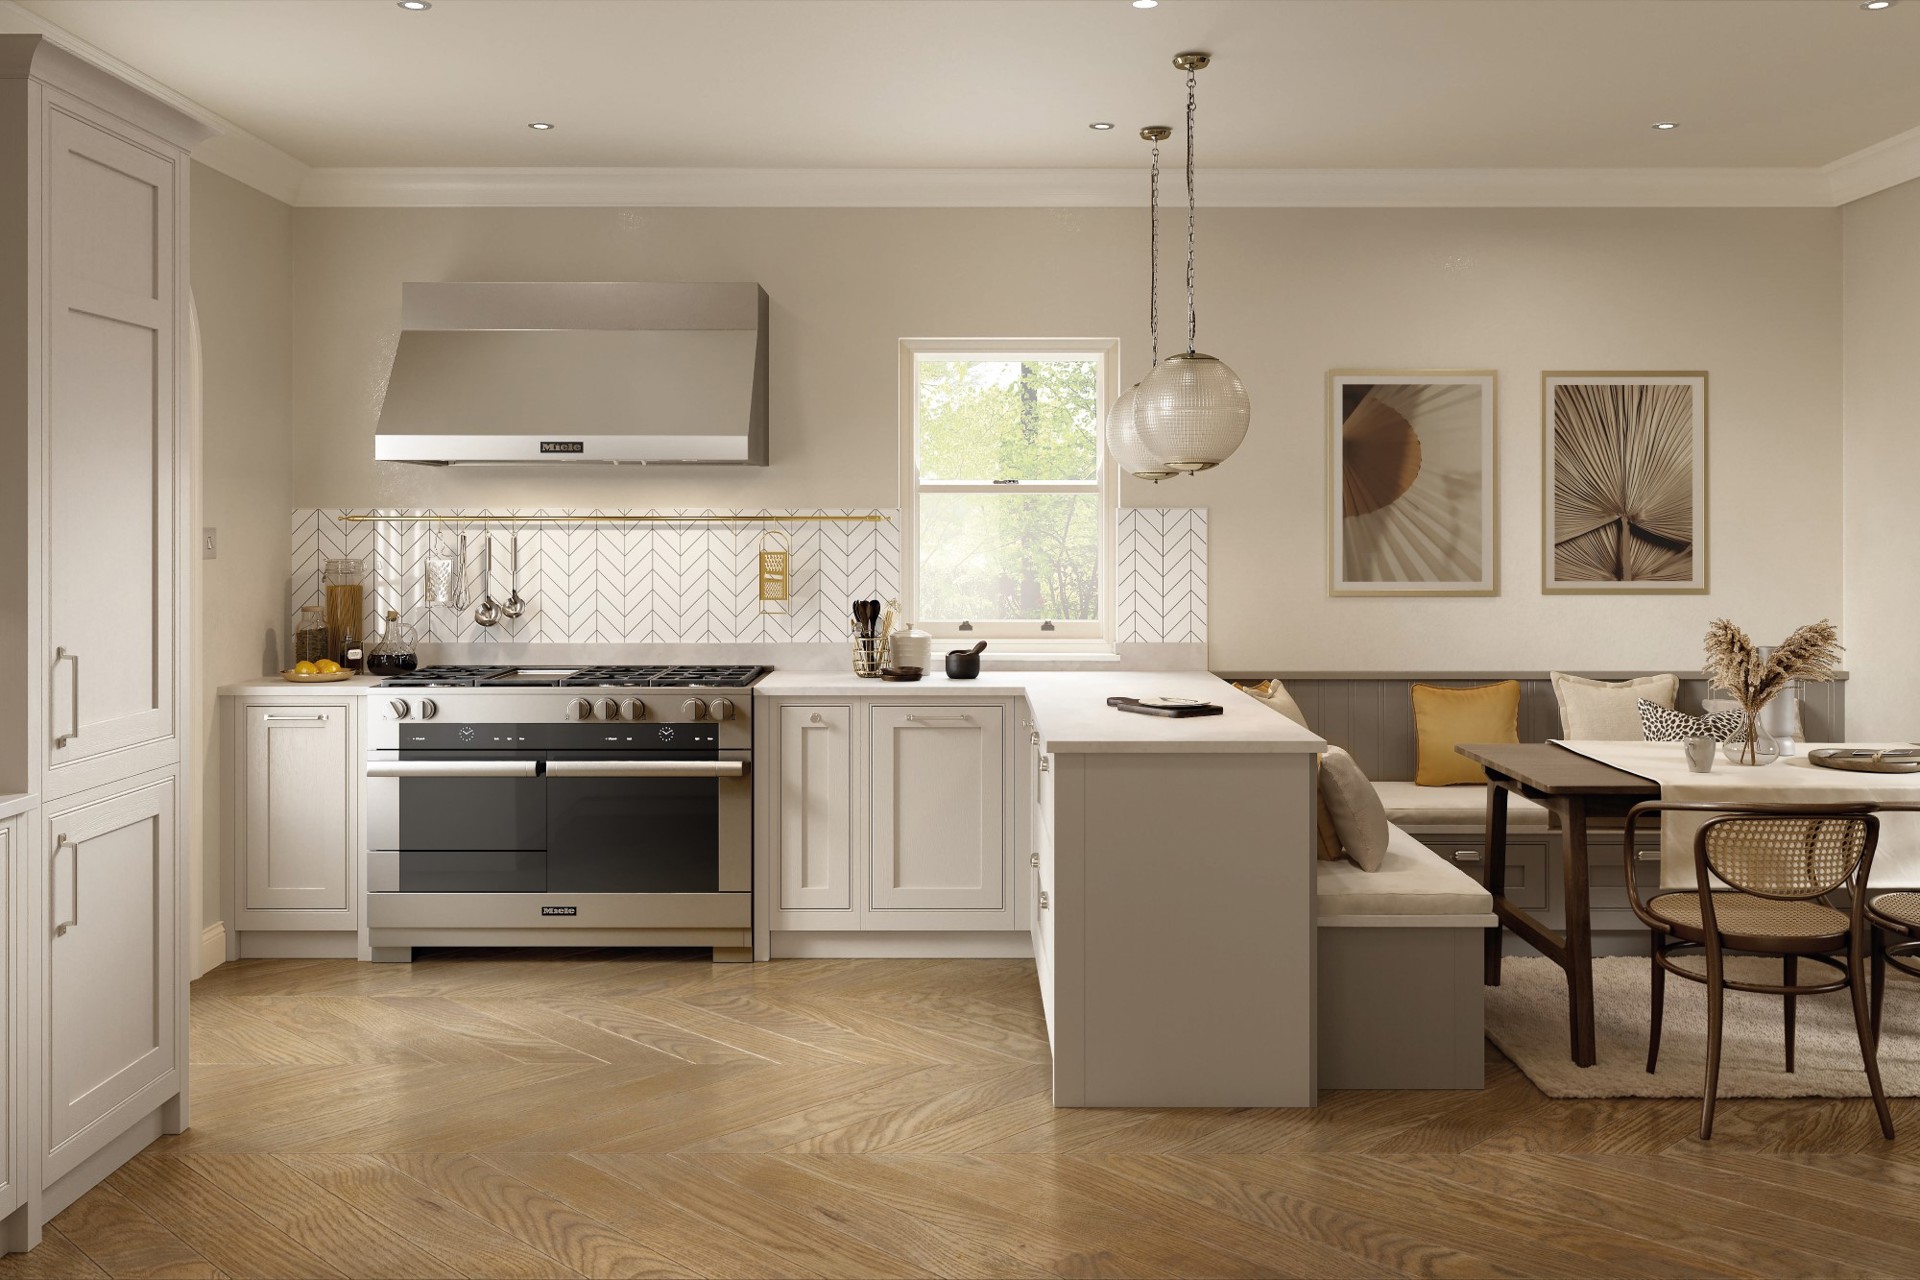 2021 Kitchen Trends – the latest design ideas with lasting style